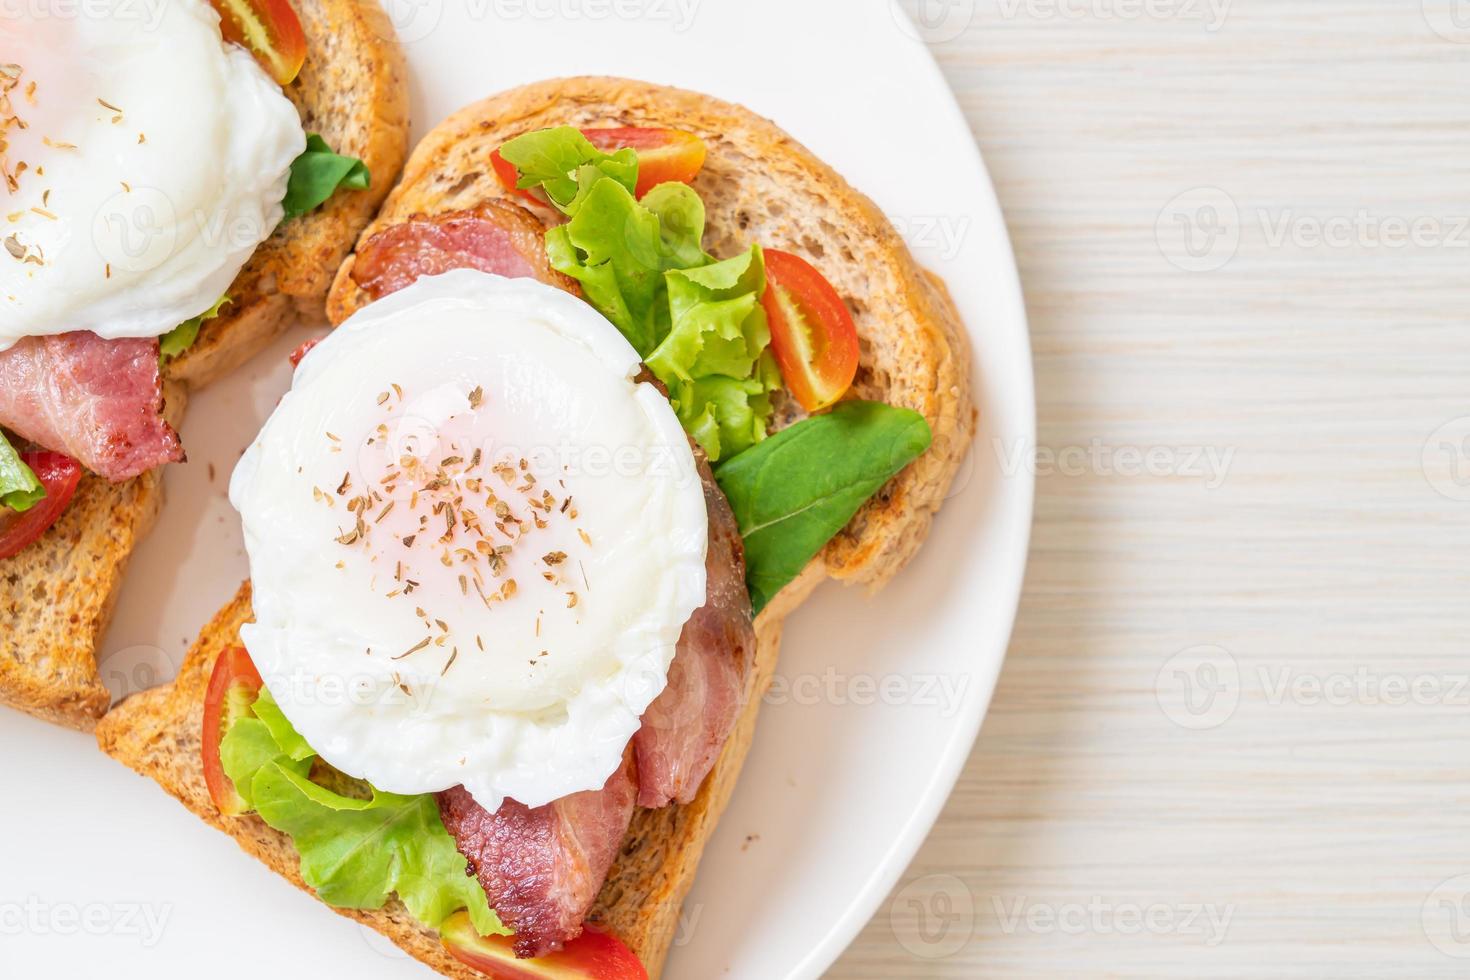 Whole wheat bread toasted with vegetable, bacon, and egg or egg benedict, for breakfast photo